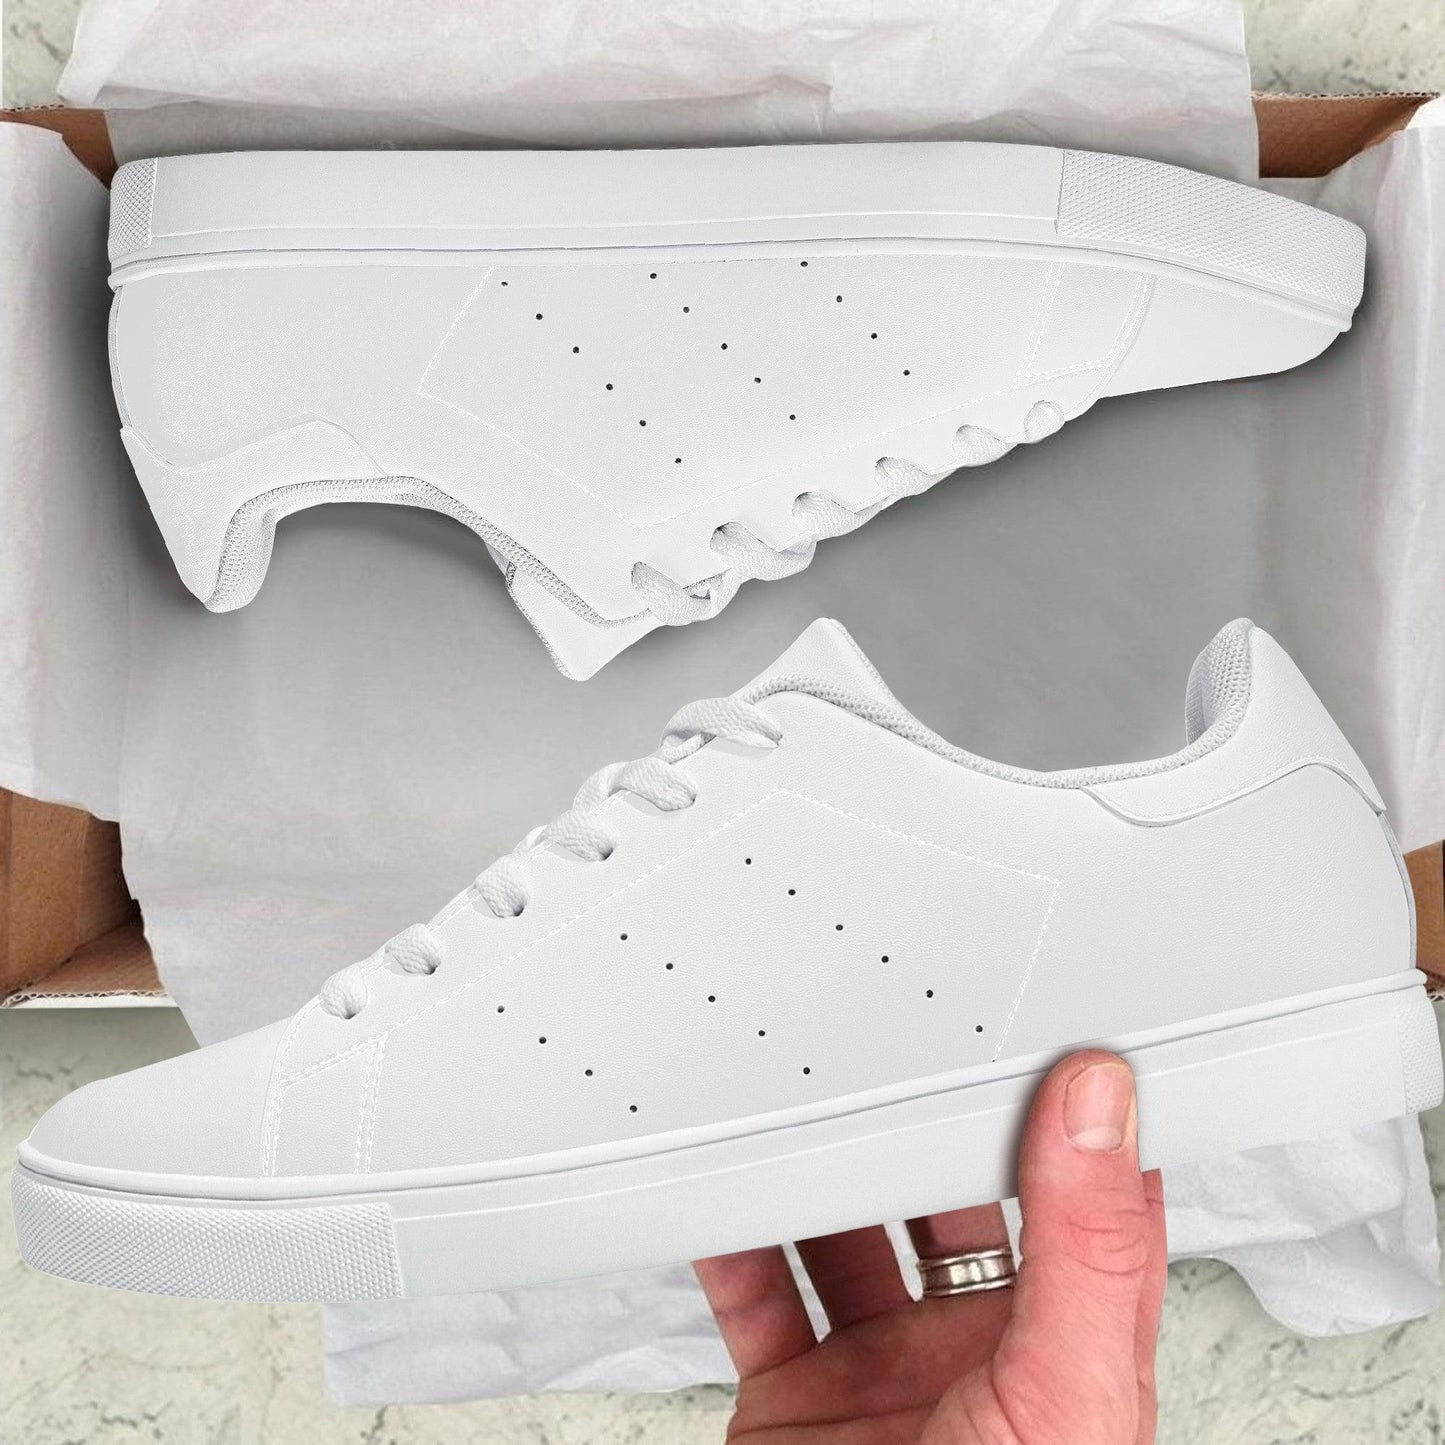 Custom Low Top Leather Shoes - White D27 Colloid Colors 